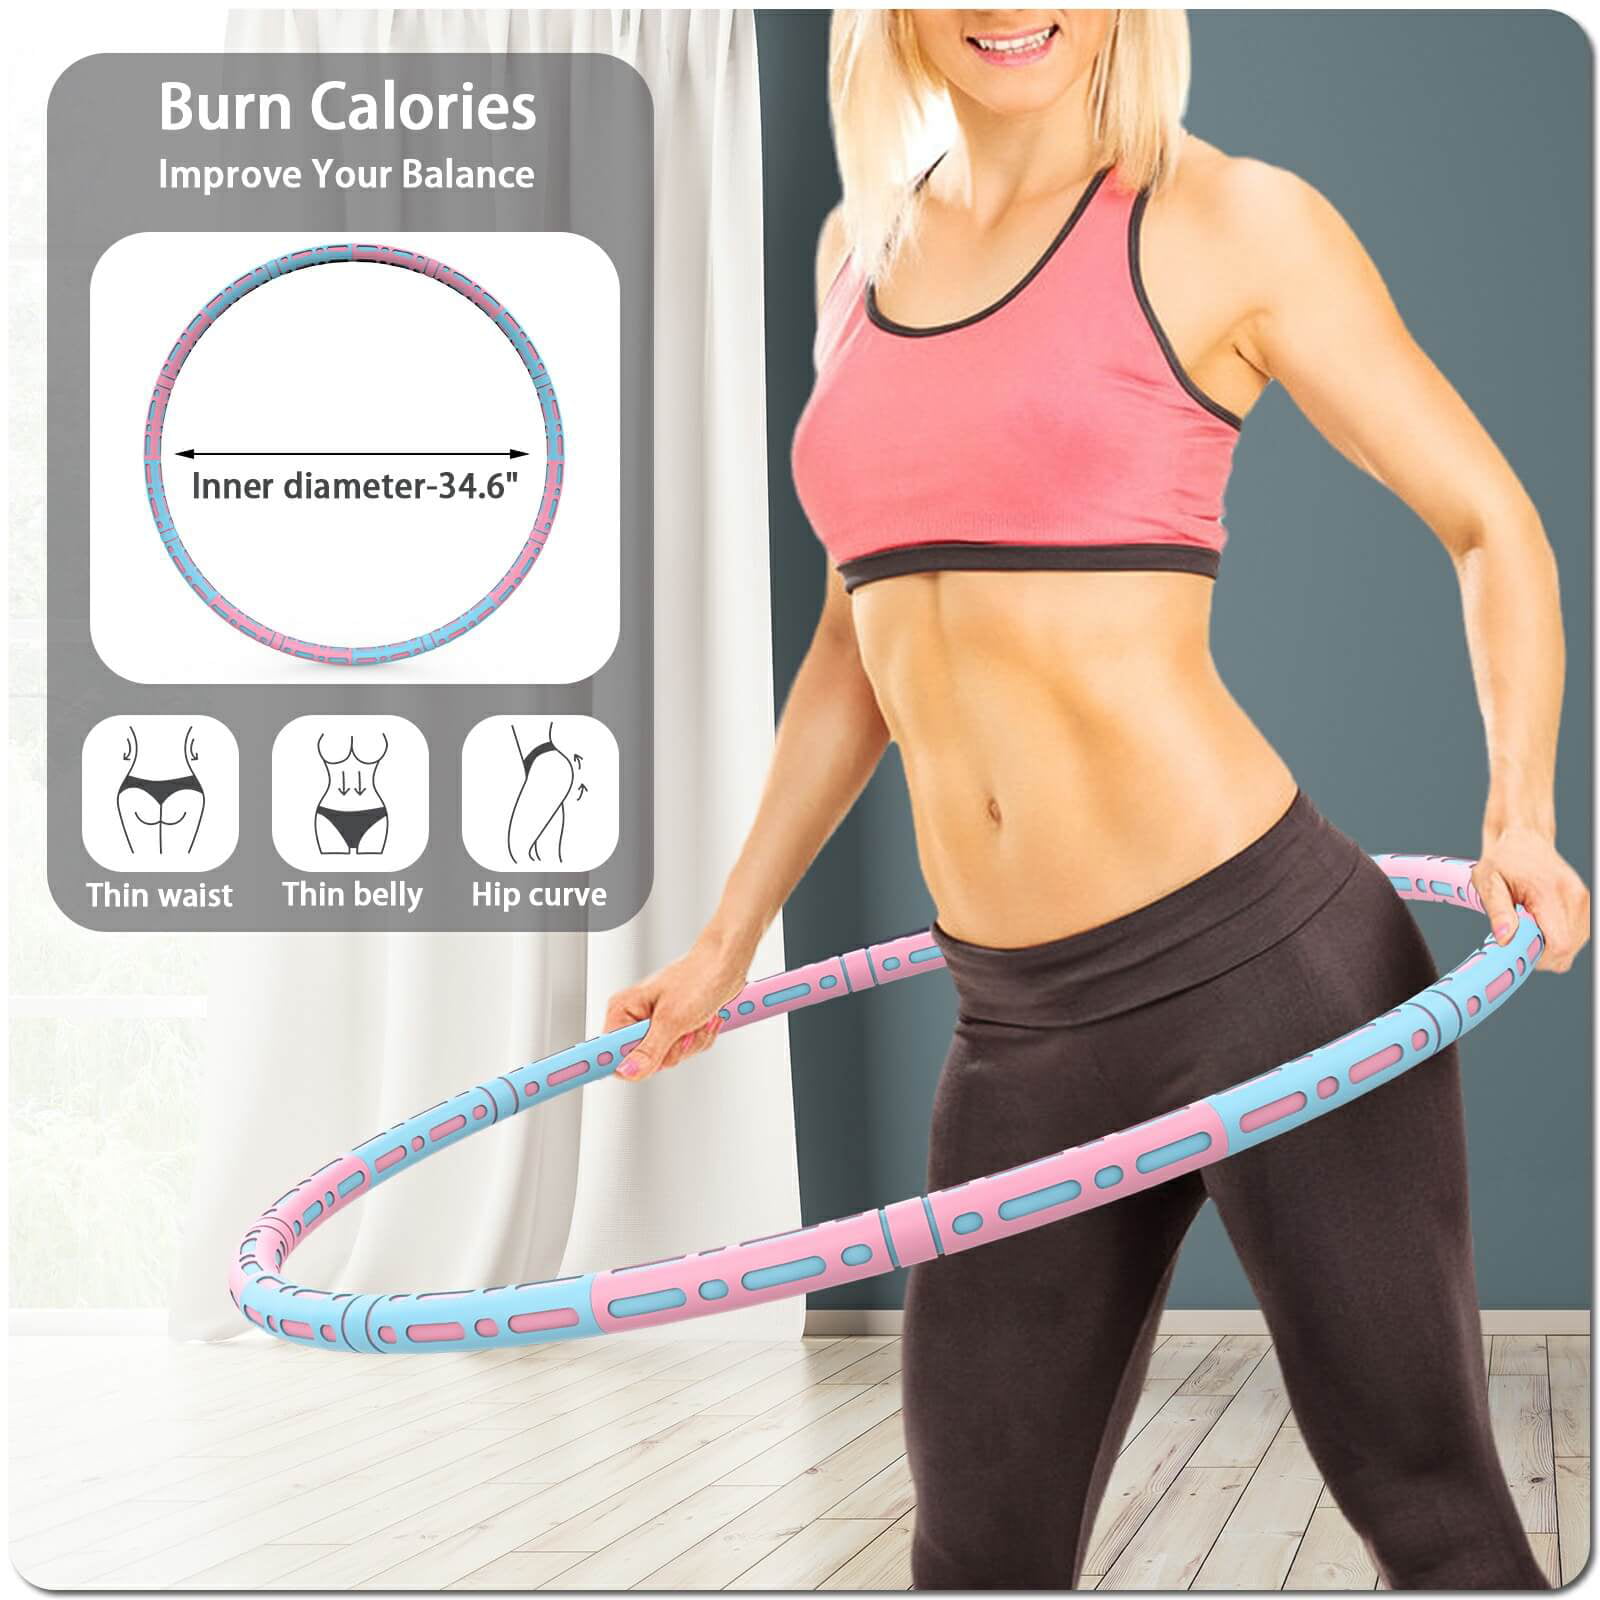 Carry Bag Included Brings Weighted Hula Hoops for Adults Weight Loss 2.2 lb Adjustable Fitness Hoop for Burning Calories Core Workout Exercise with High Density Foam 